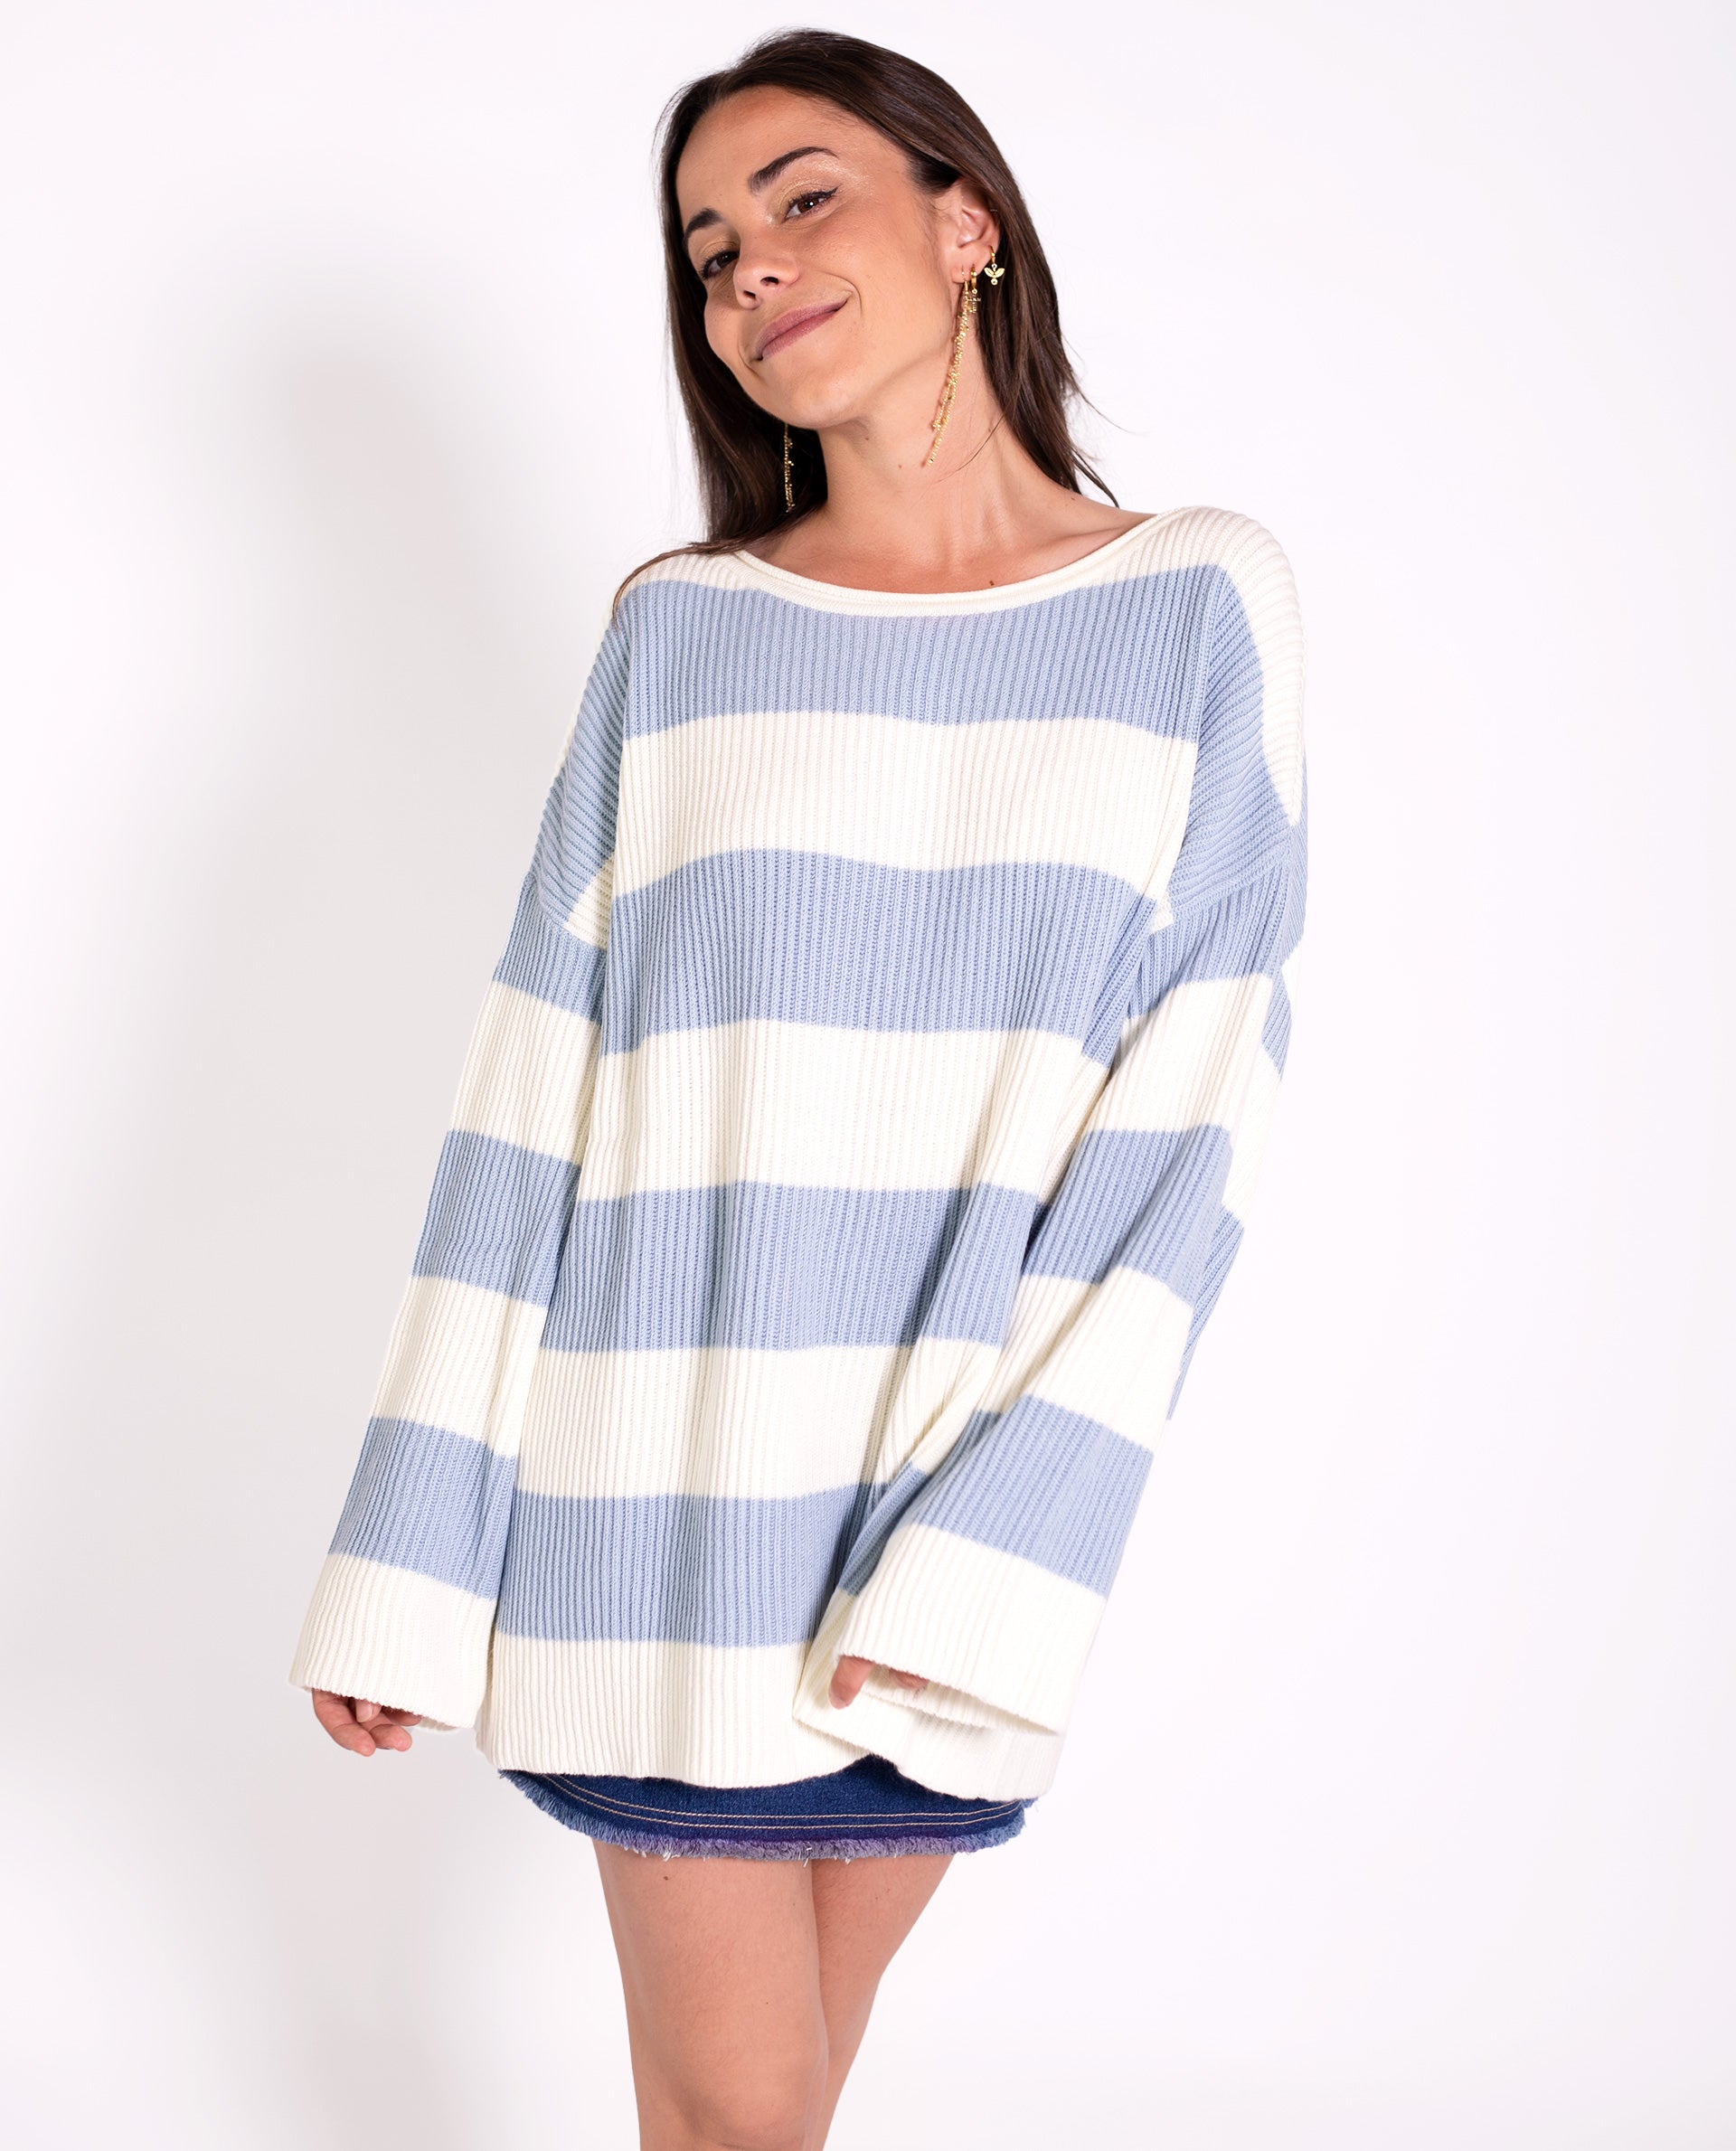 JERSEY JUST LIVING | Jersey Rayas Azul y Blanco Oversize Mujer | THE-ARE